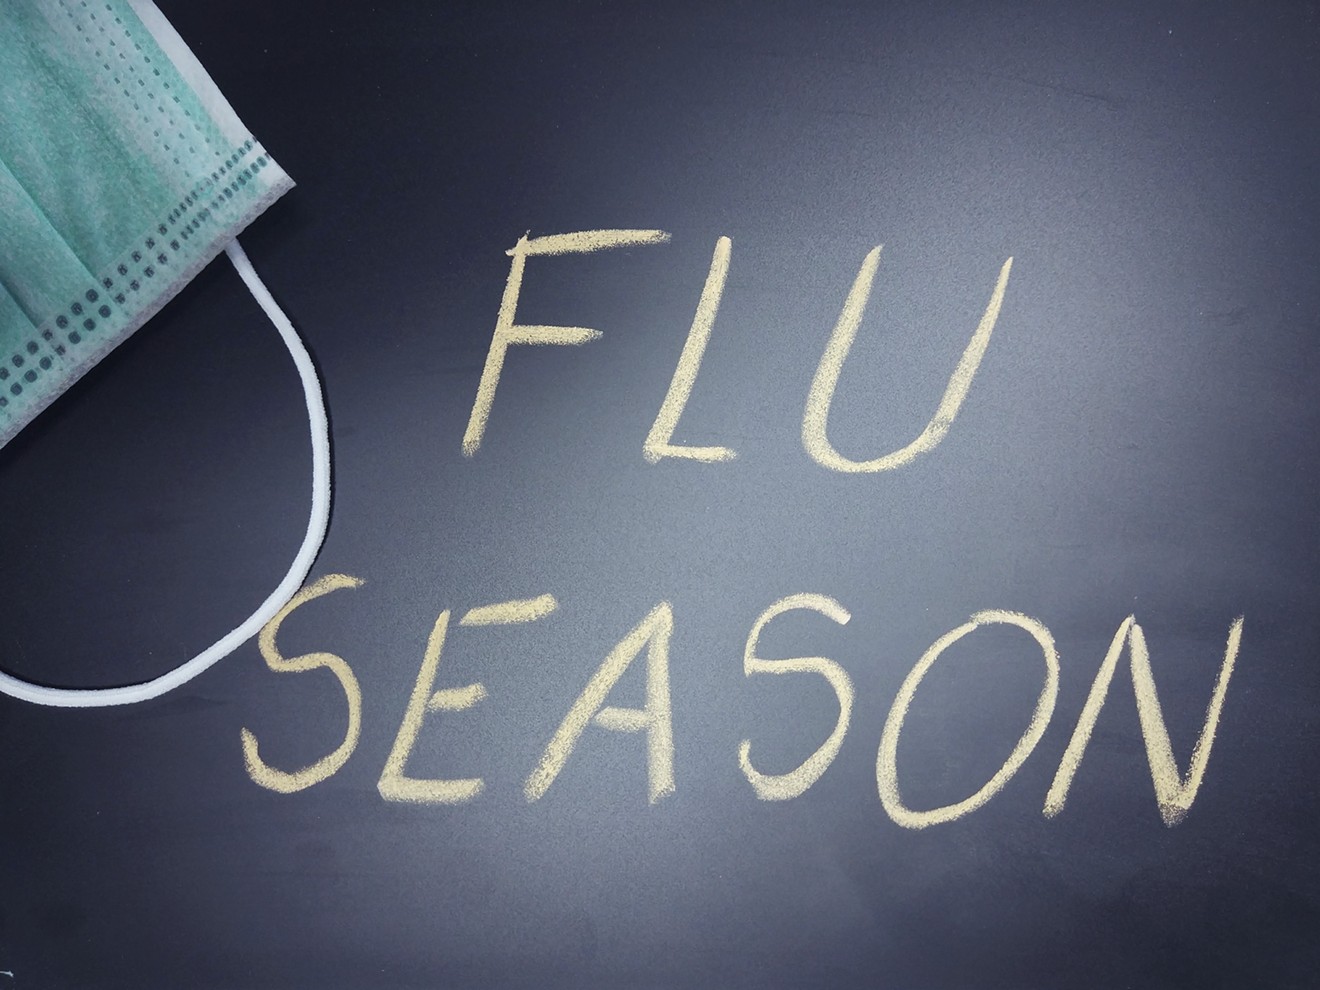 This year's flu season keeps going and going.